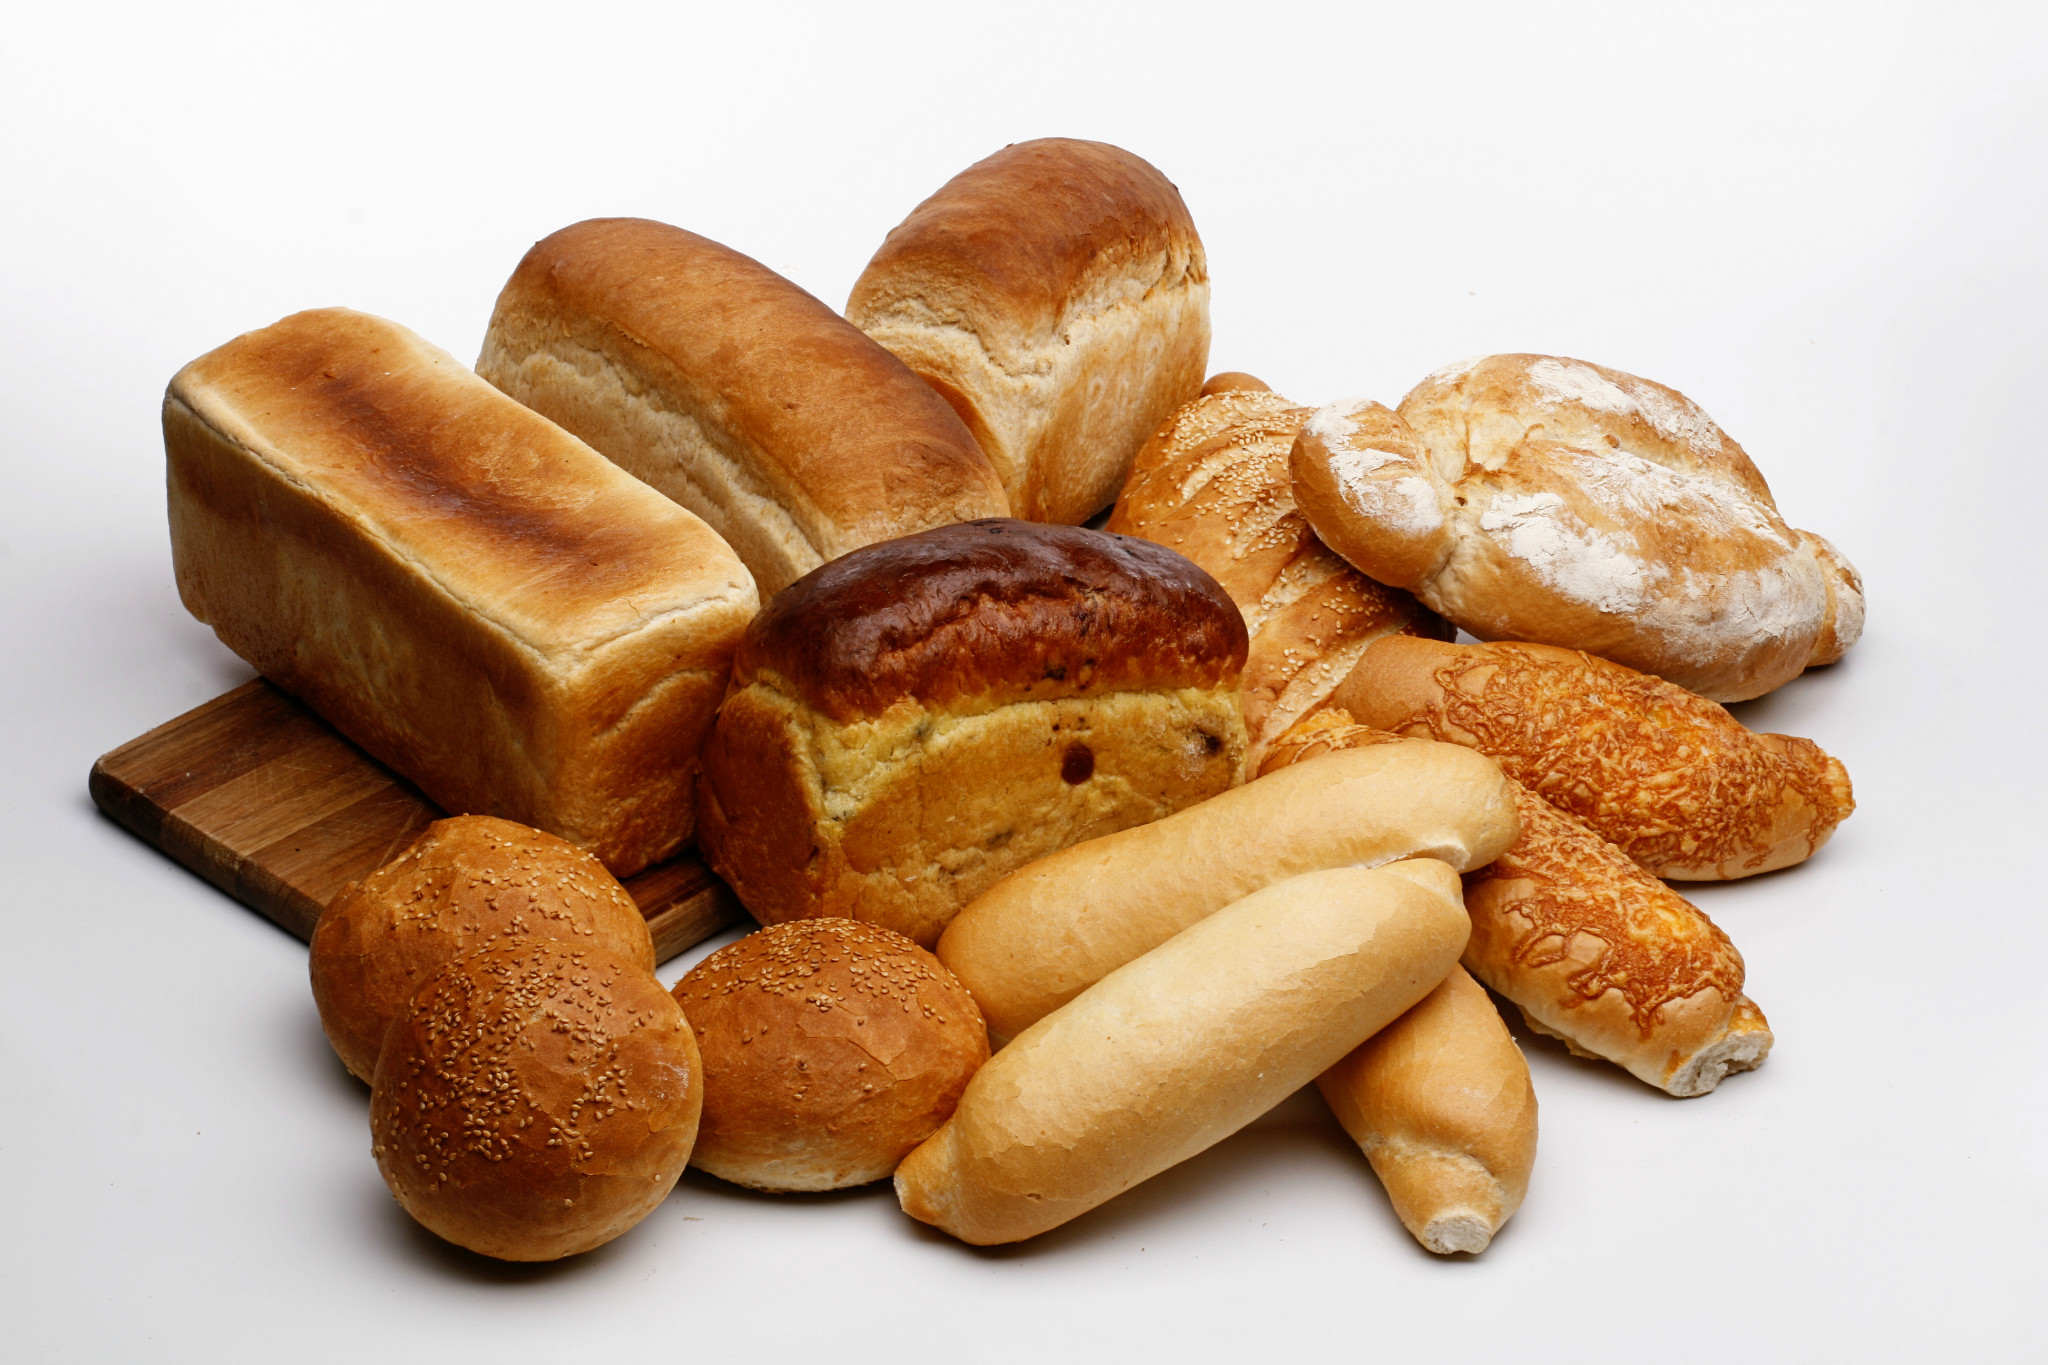 Frozen Bakery Products Market Ongoing Trends and Recent Developments | Key Players are Aryzta AG, Associated British Foods plc, Dawn Food Products, Inc., EUROPASTRY, S.A., FLOWERS FOODS, General Mills